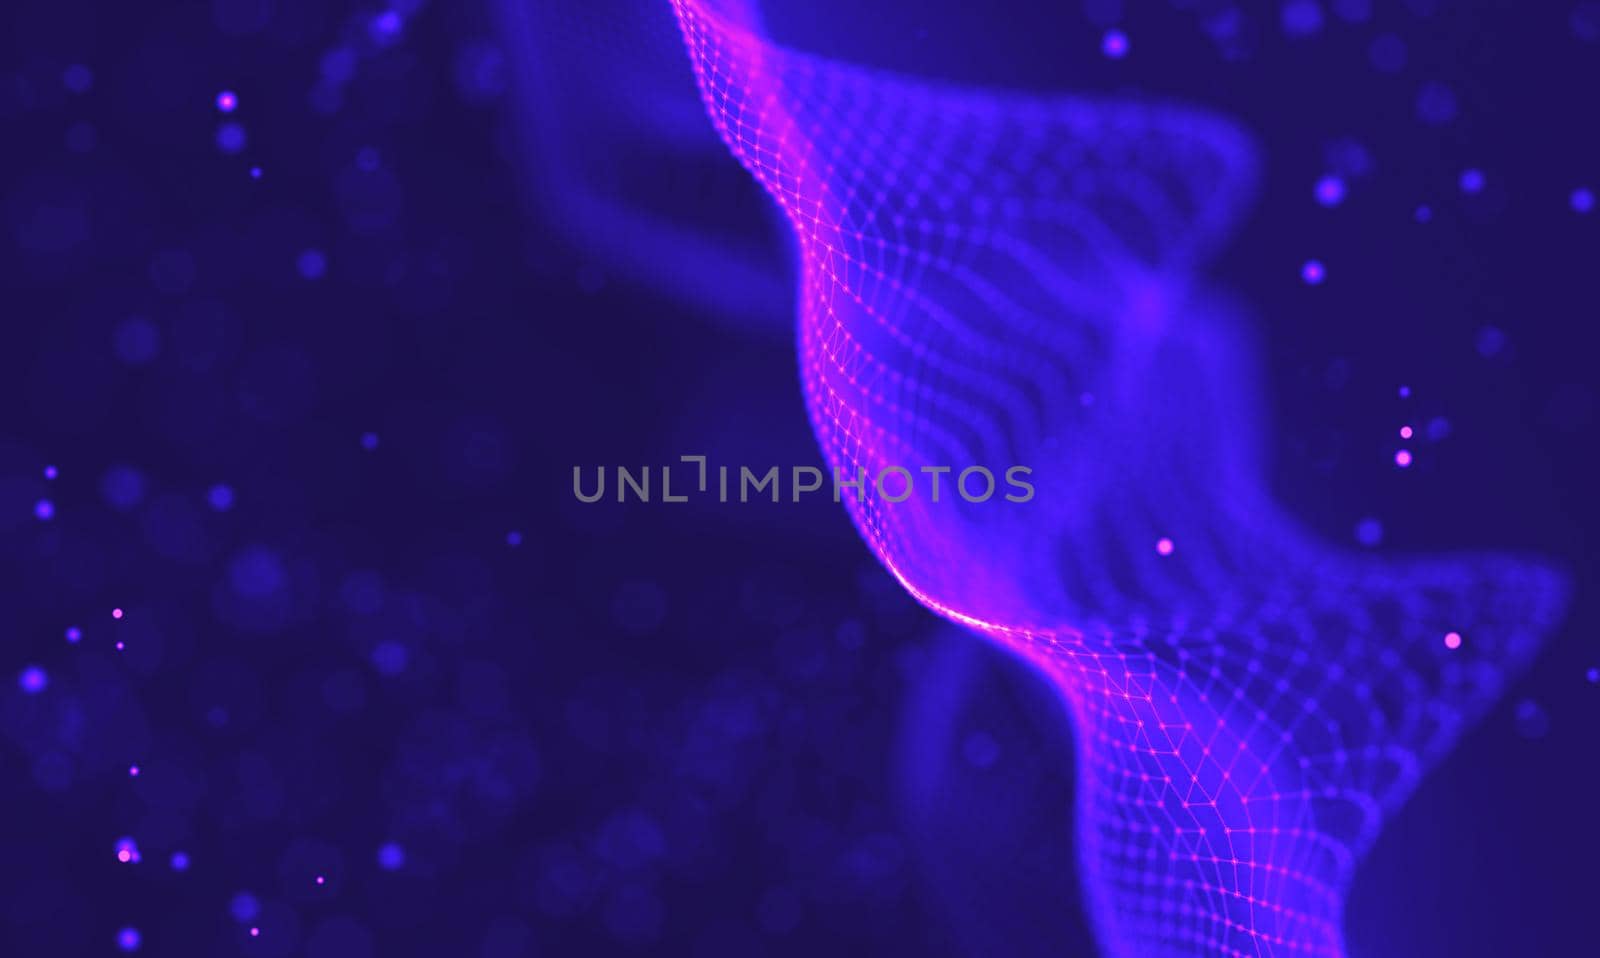 Abstract futuristic illustration of polygonal surface. Low poly shape with connecting dots and lines on dark background. 3D rendering